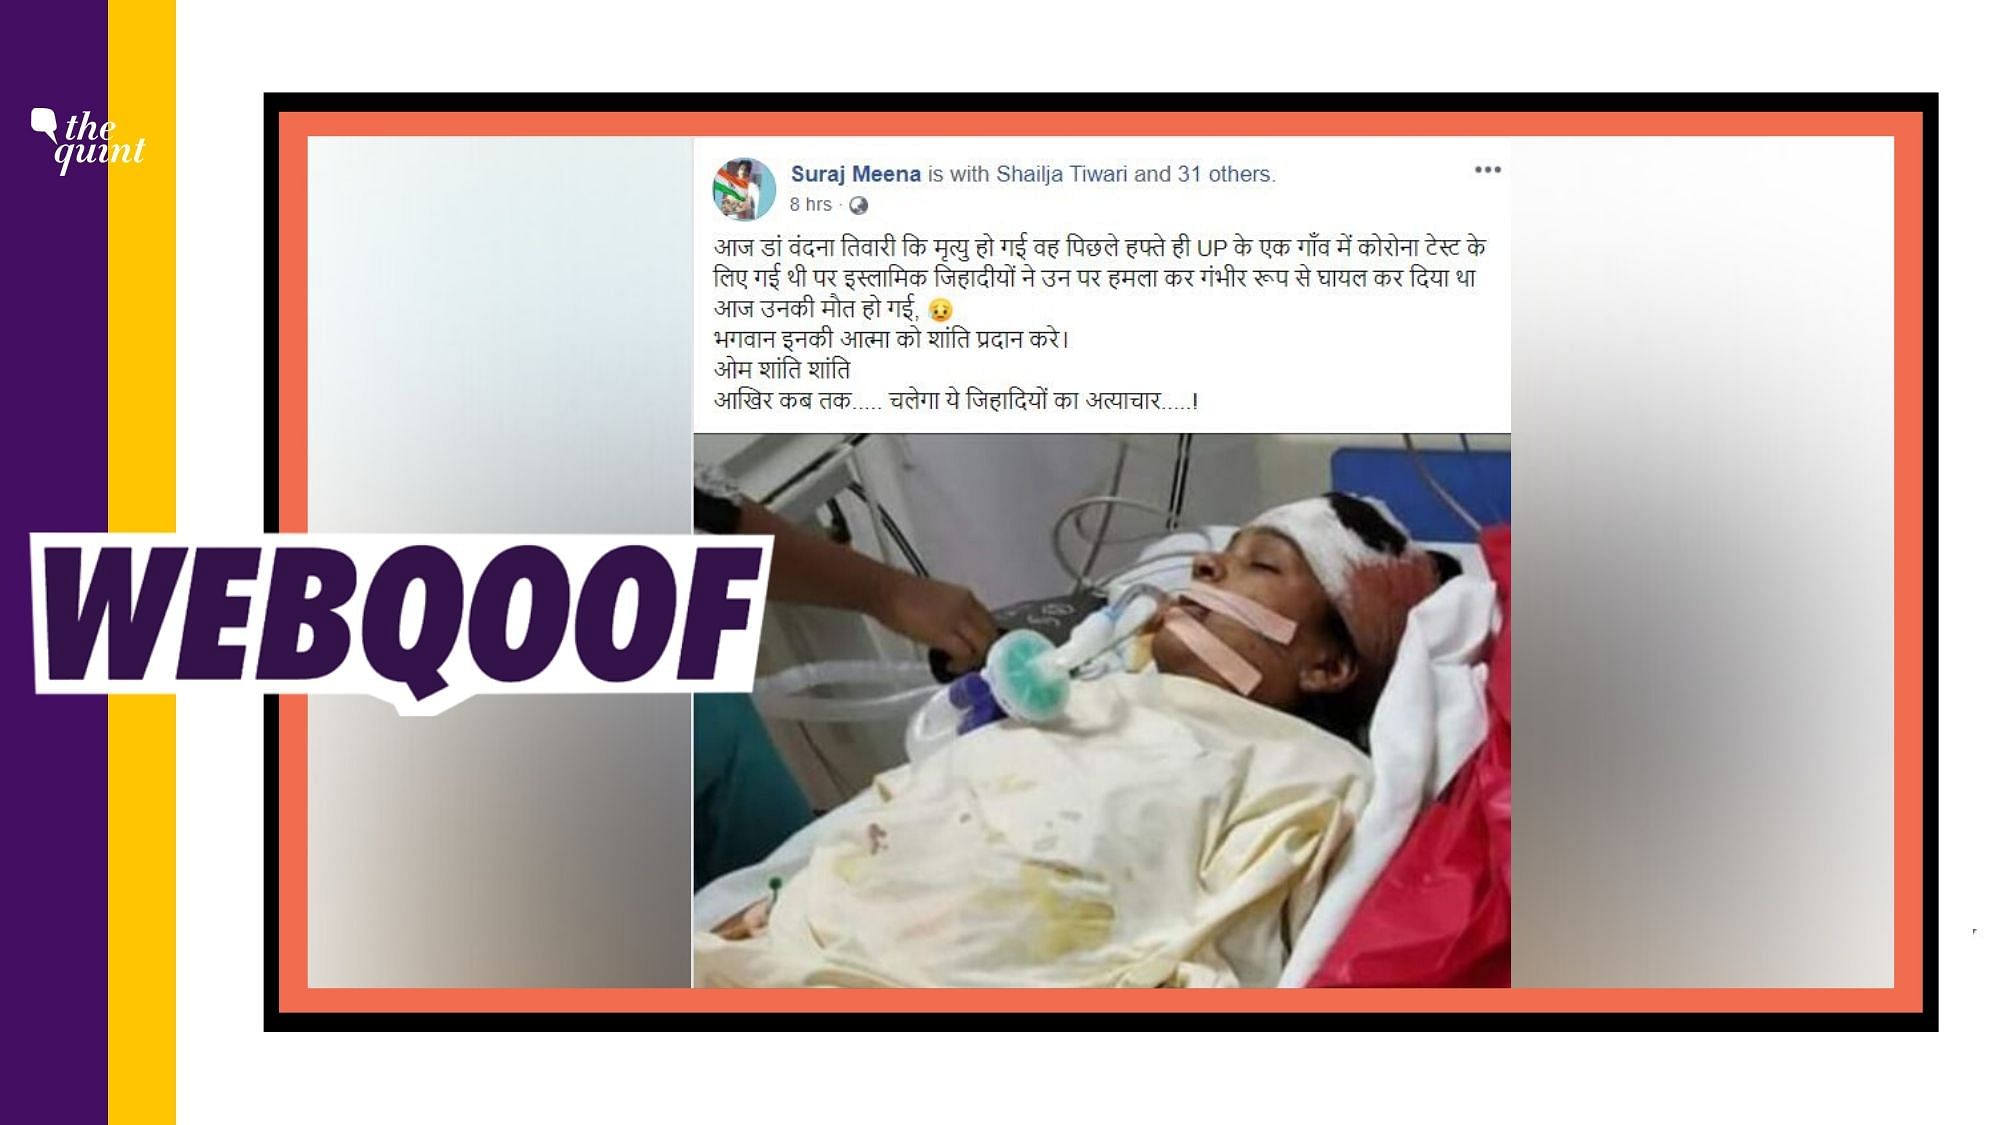 A viral message claims that Dr Vandana Tiwari who was involved in the treatment of coronavirus patients was attacked by “Islamist Jihadis” in Uttar Pradesh.